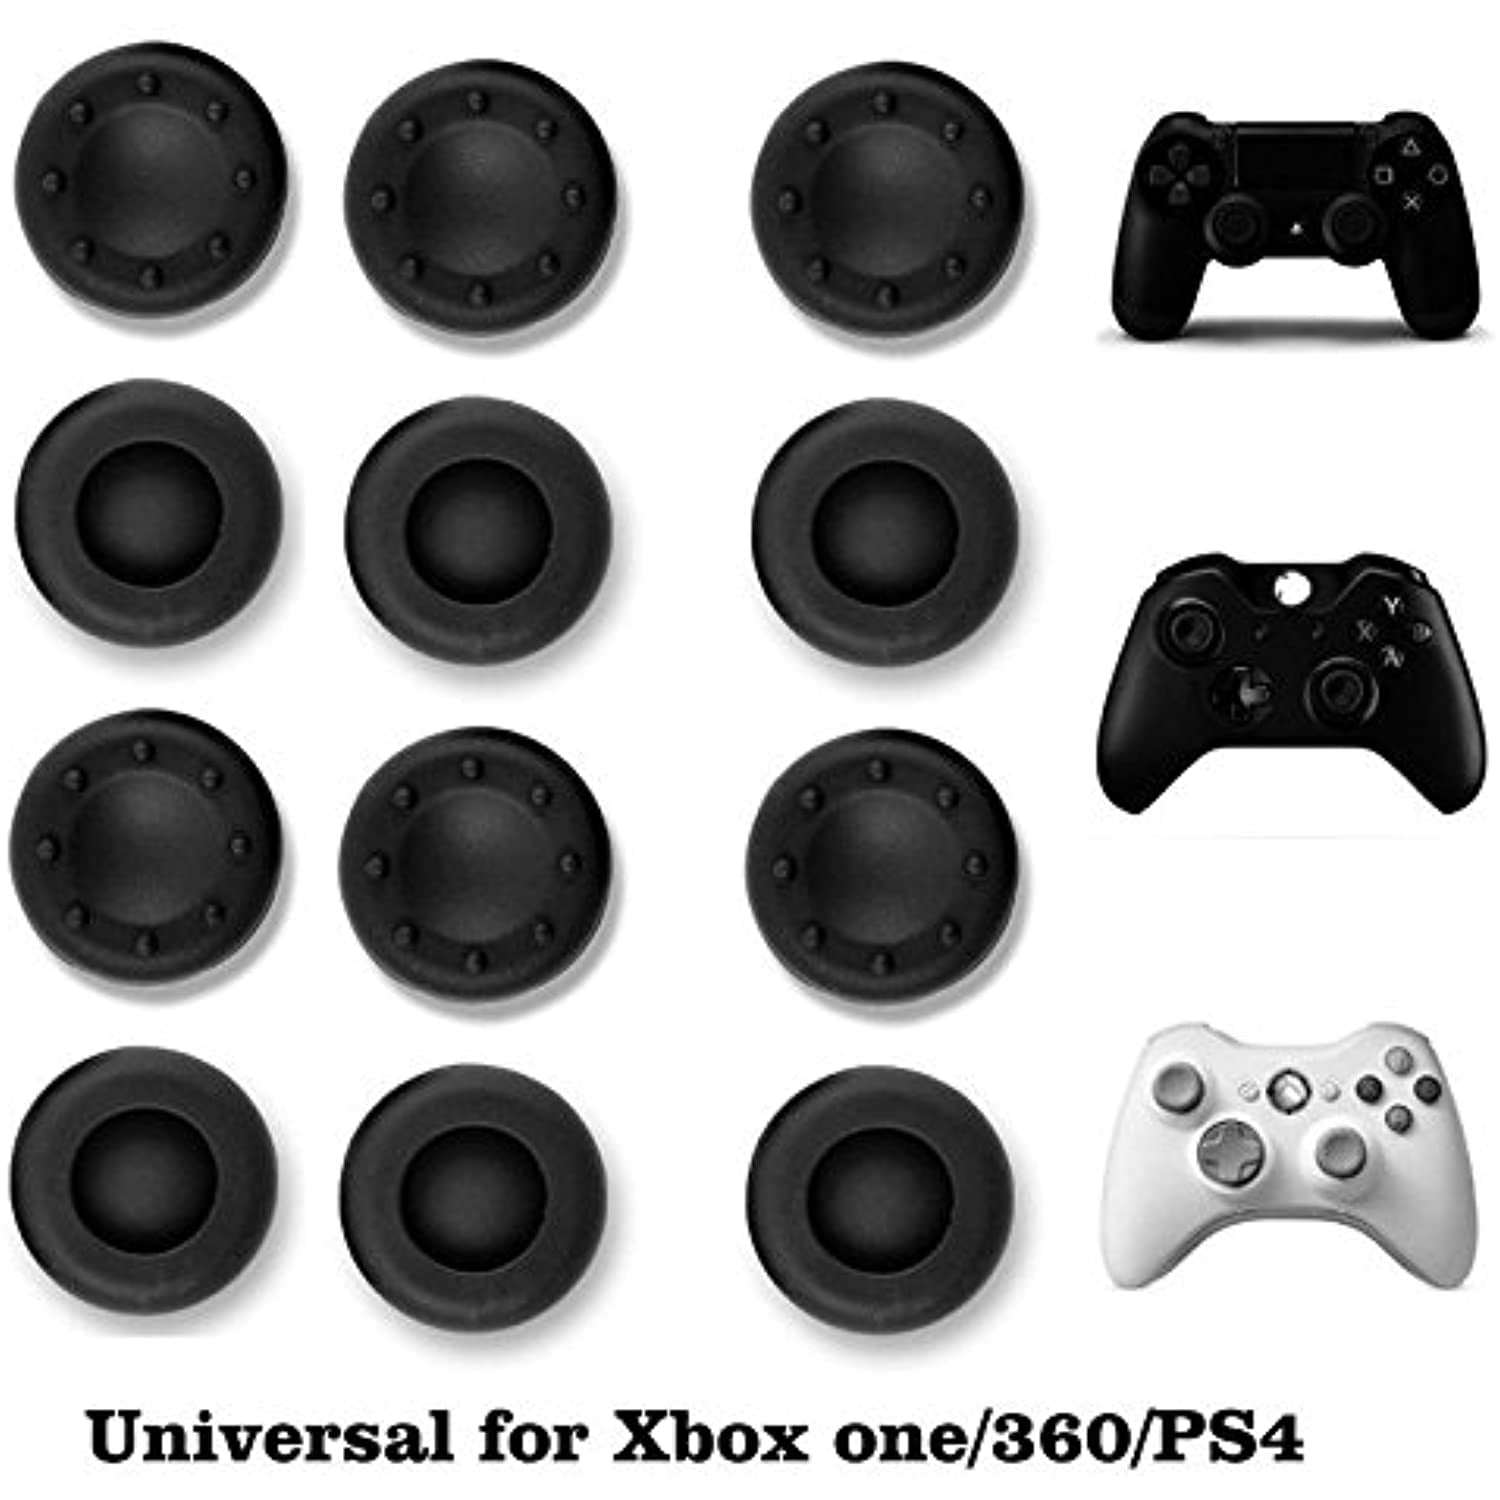 Set of 4 Thumb Stick Grips Cap Cover Joystick Thumbstick Grips Silicone Caps for PS2, PS3, PS4, Xbox 360, Xbox One Game Controller Interesting 